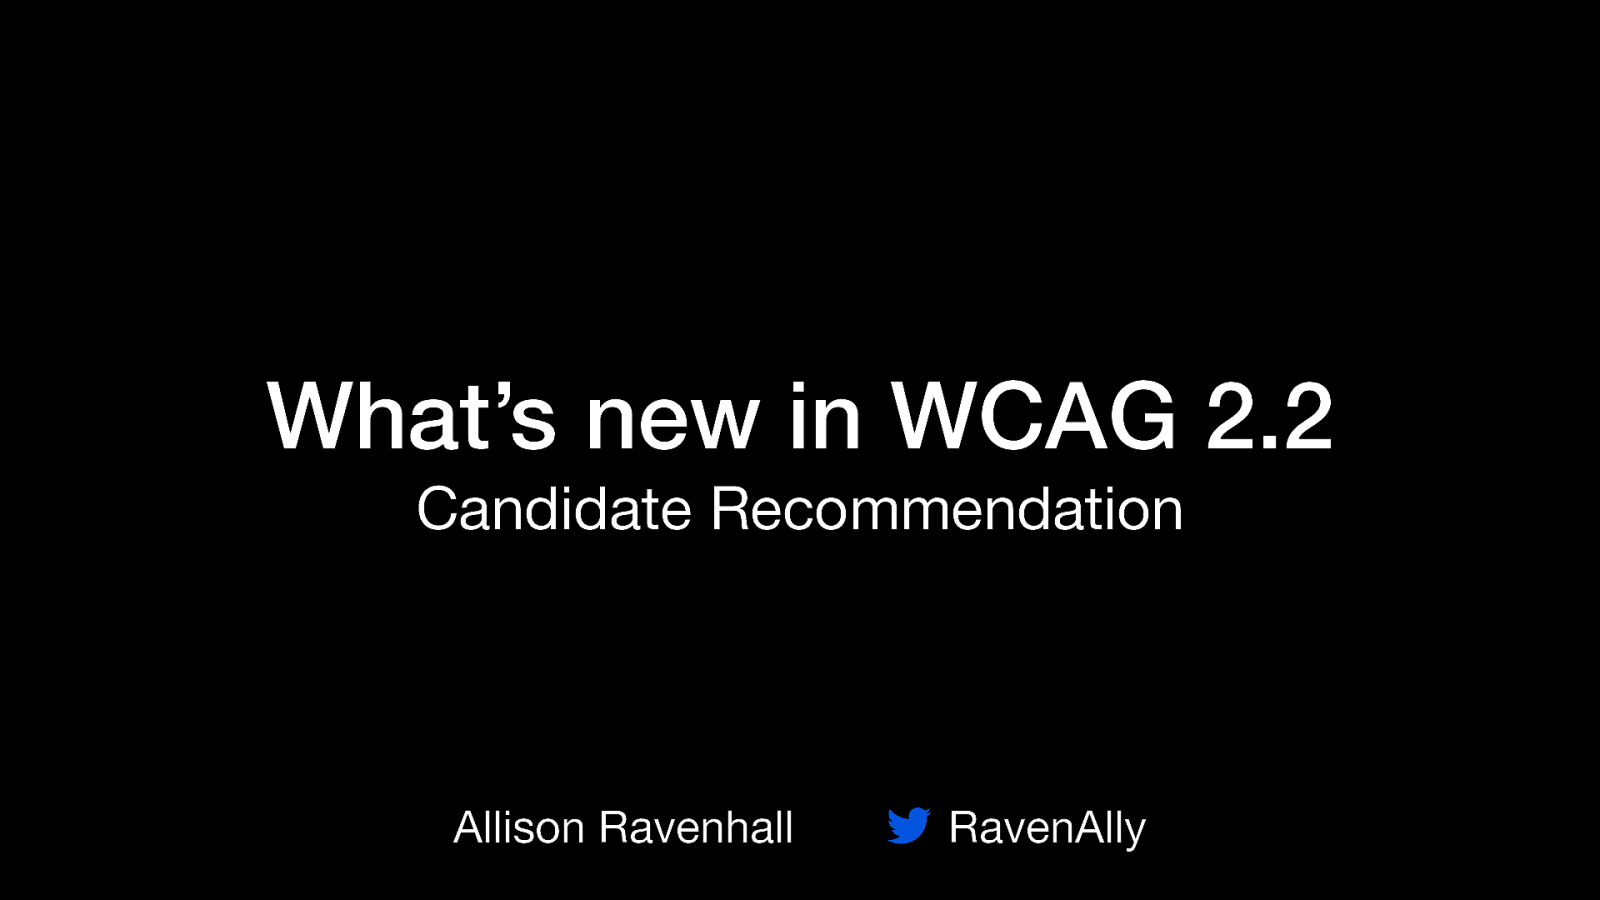 What’s new in WCAG 2.2